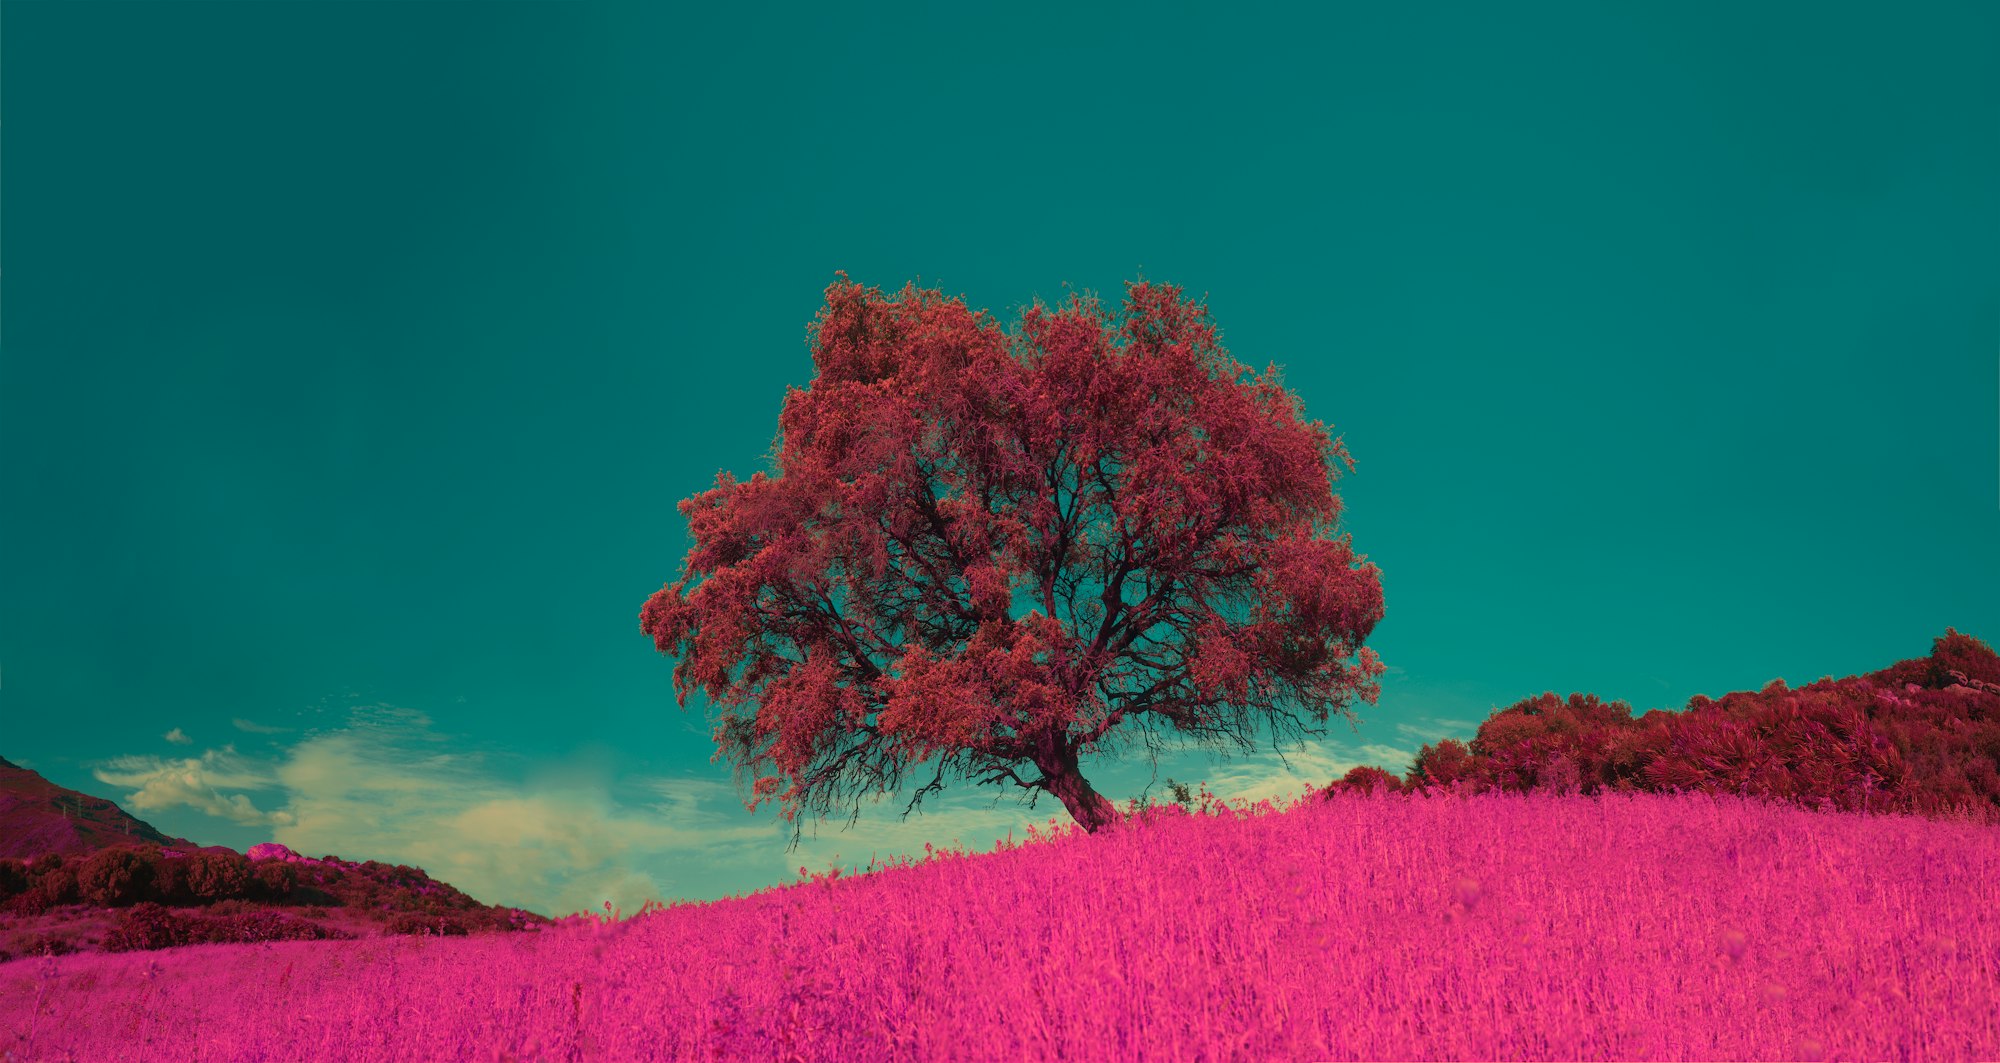 Isolated tree on filed, teal and pink palette